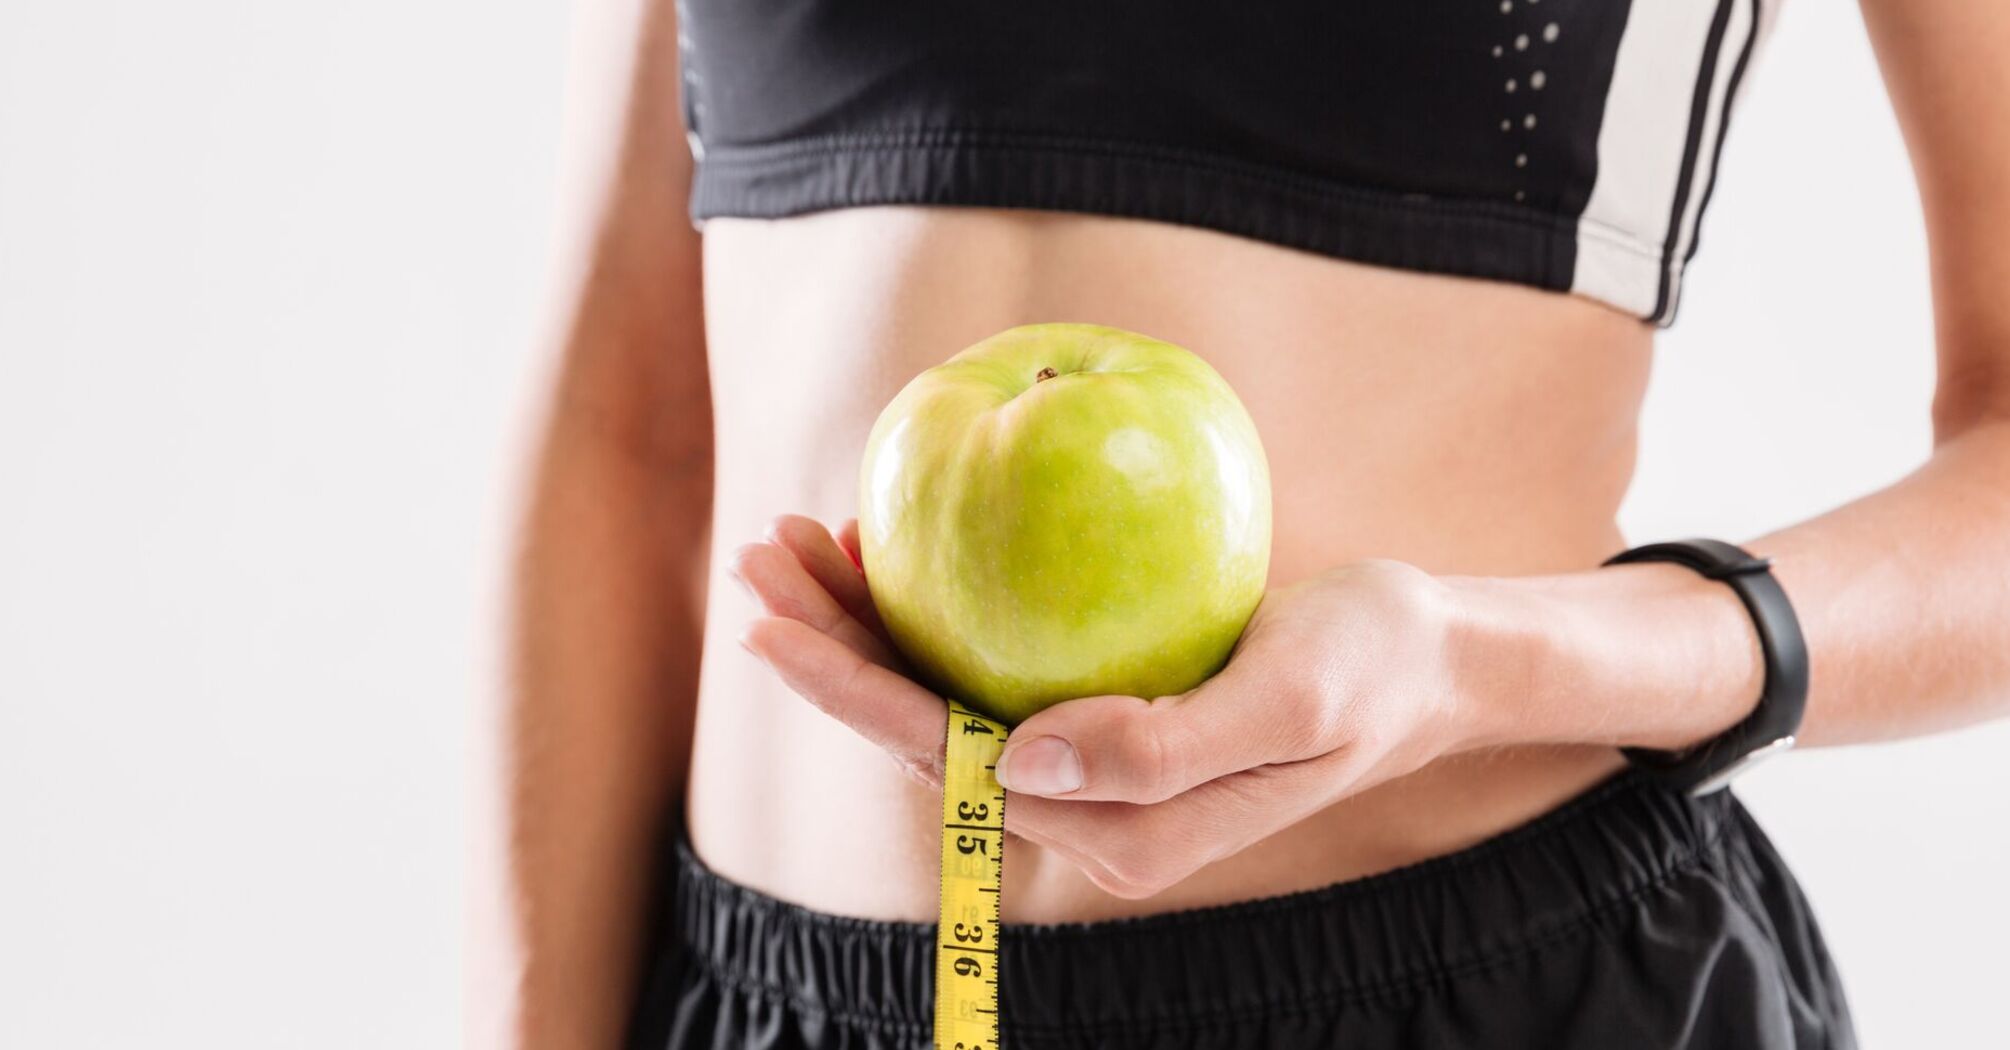 The path to healthy weight loss